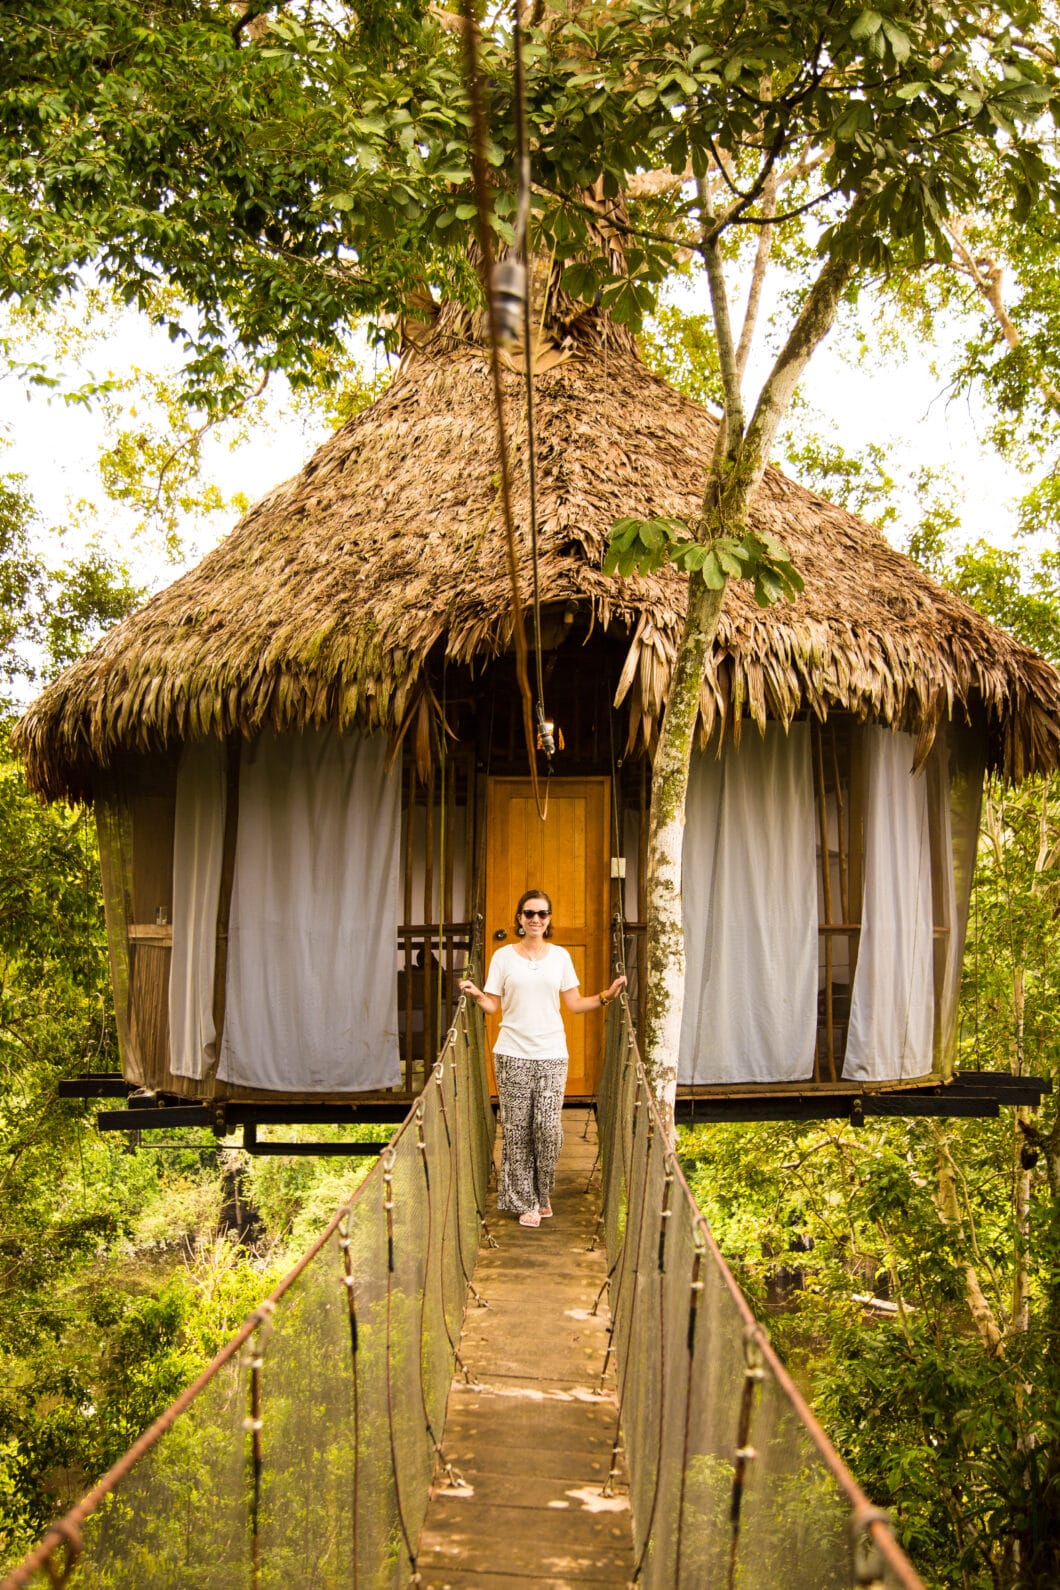 My Honest Experience Staying at the Treehouse Lodge in Peru